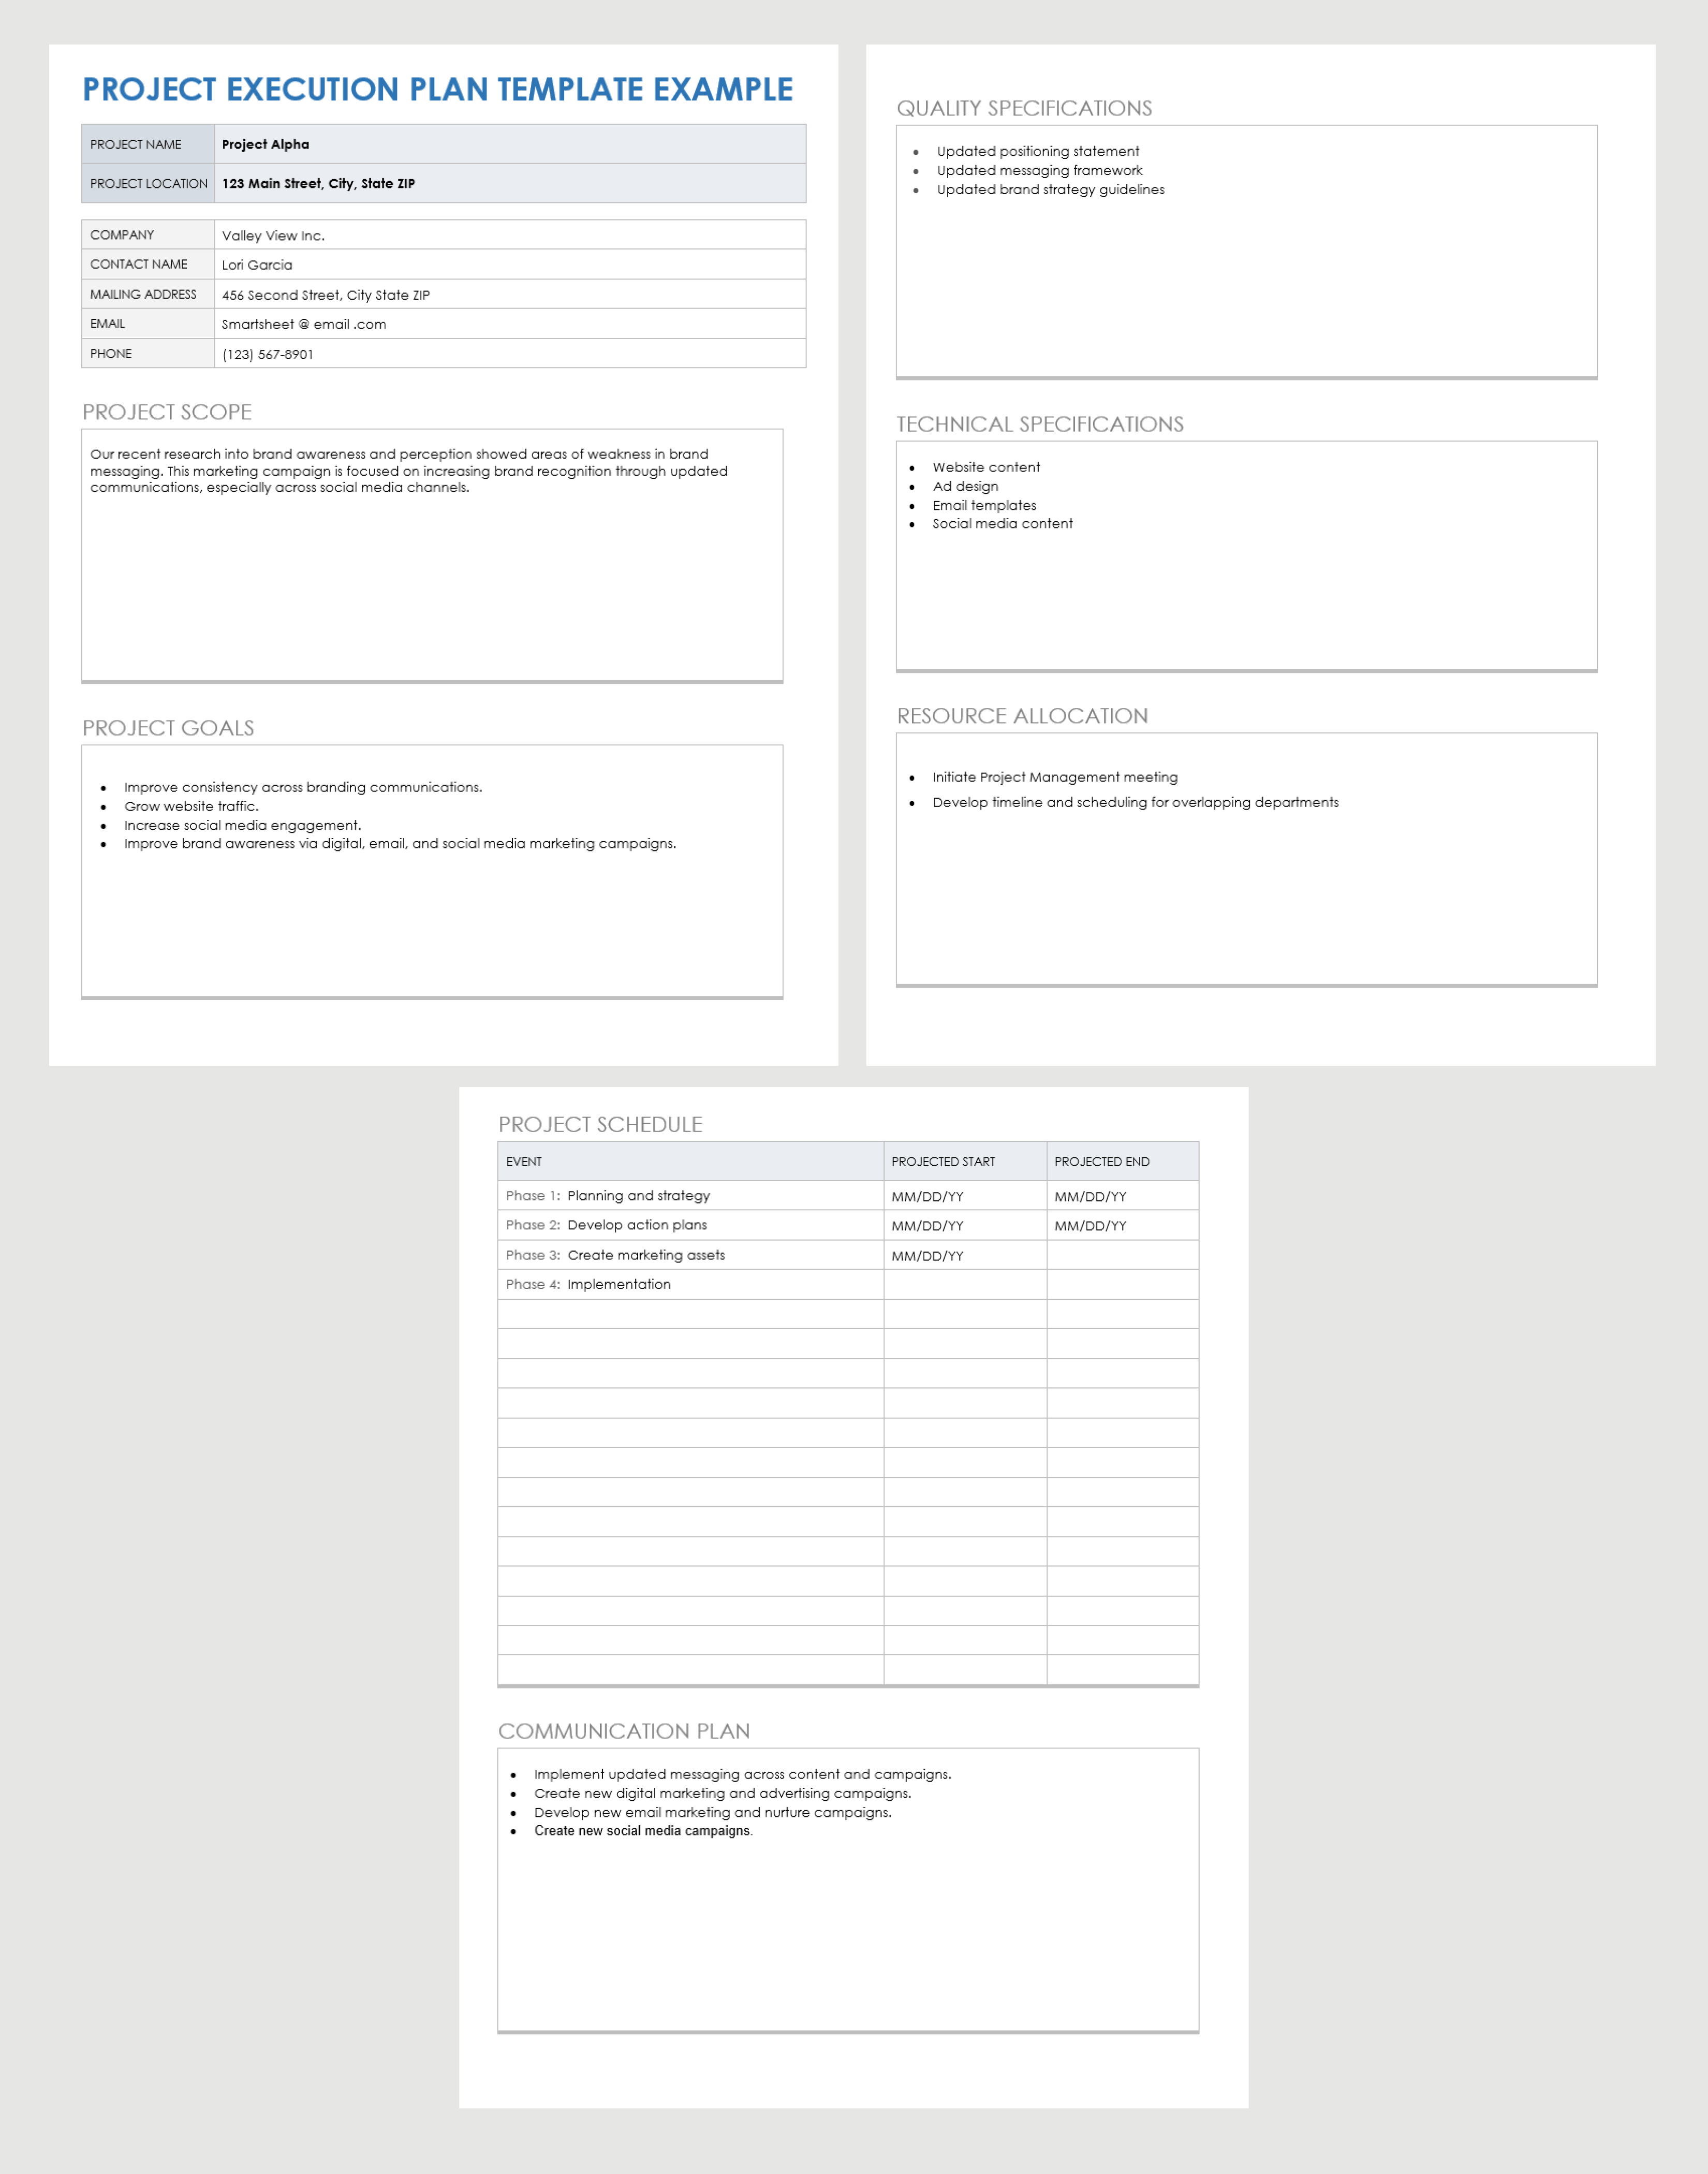 Project Execution Plan Example Template